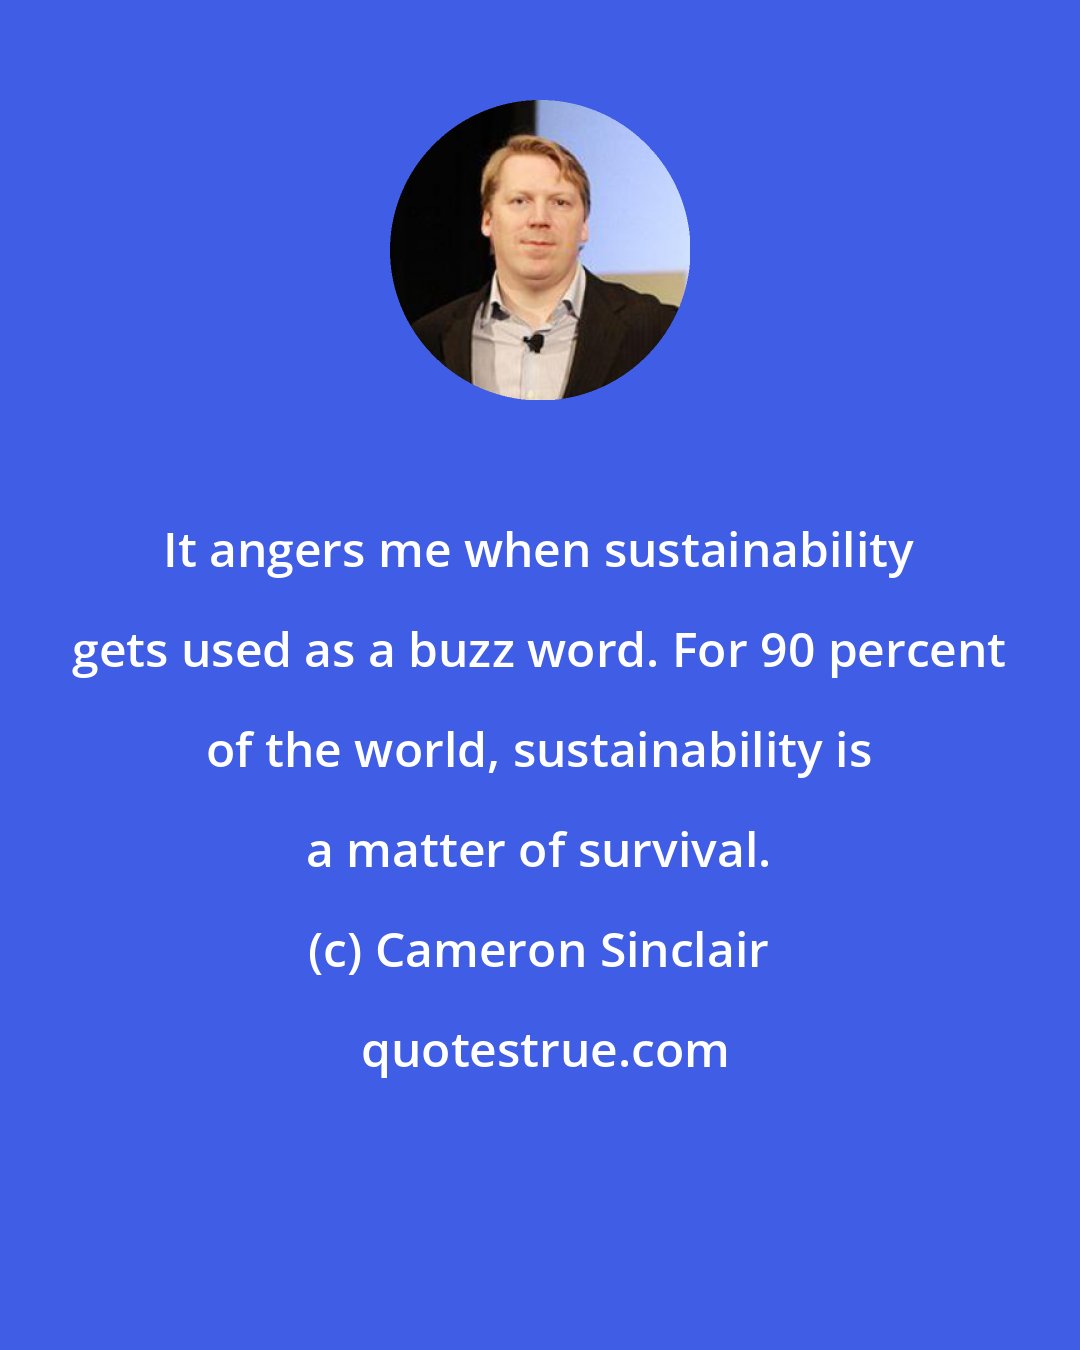 Cameron Sinclair: It angers me when sustainability gets used as a buzz word. For 90 percent of the world, sustainability is a matter of survival.